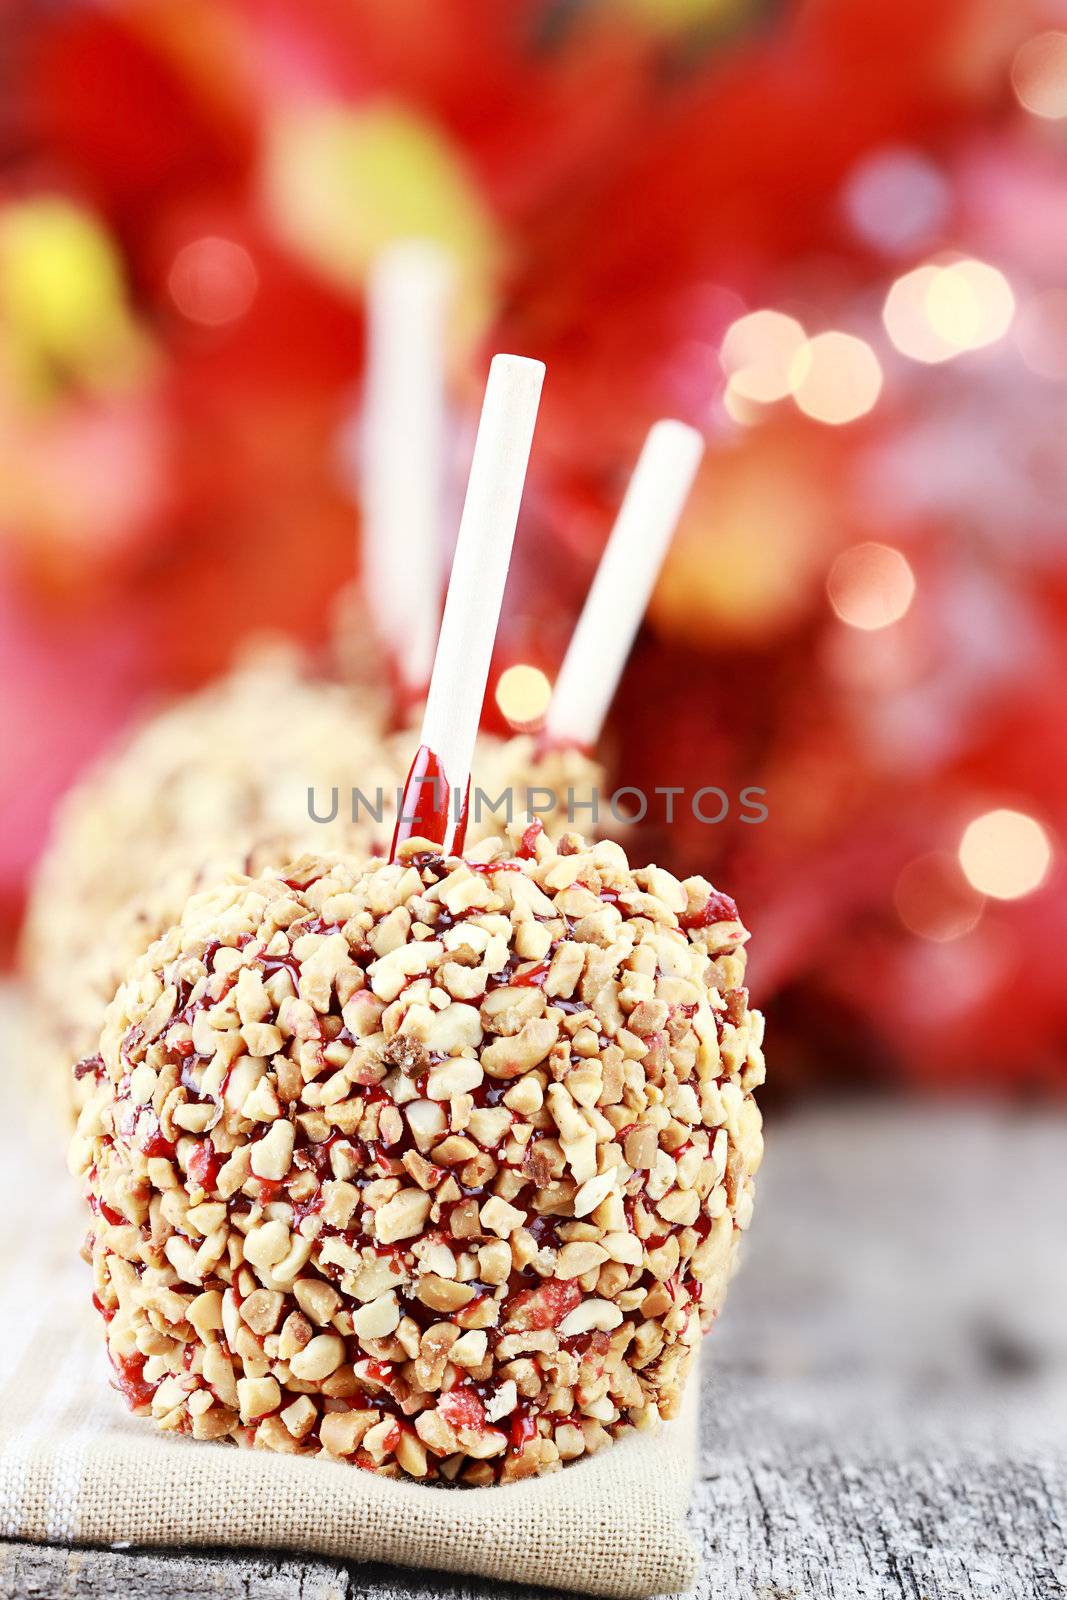 Candy Apples by StephanieFrey